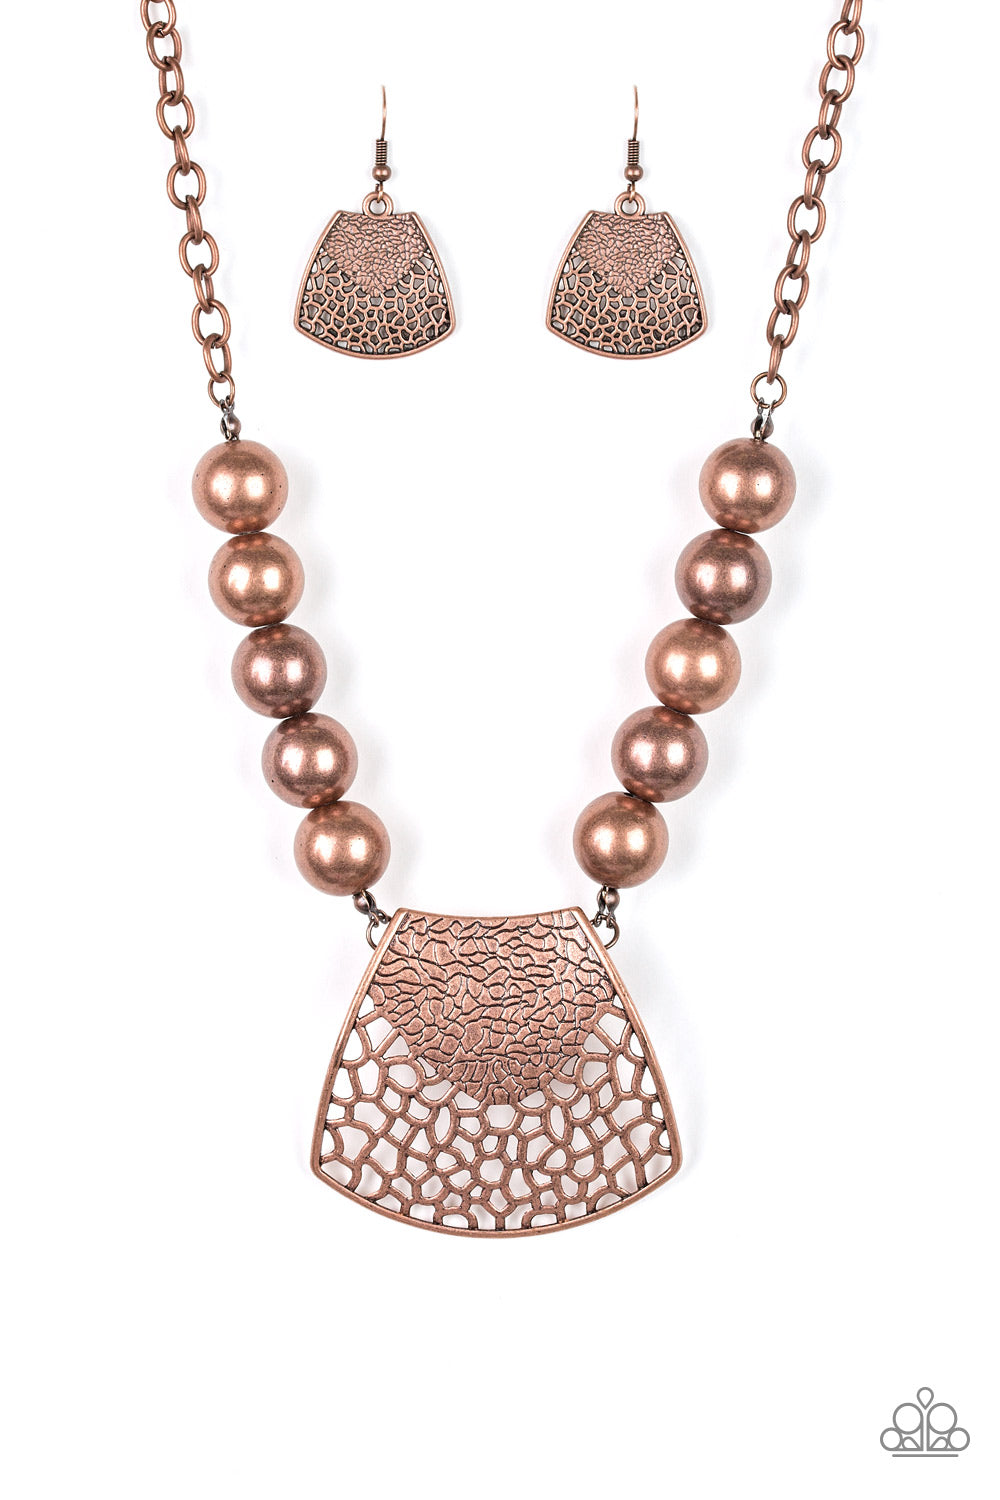 Large and In Charge Copper Paparazzi Necklaces Cashmere Pink Jewels - Cashmere Pink Jewels & Accessories, Cashmere Pink Jewels & Accessories - Paparazzi